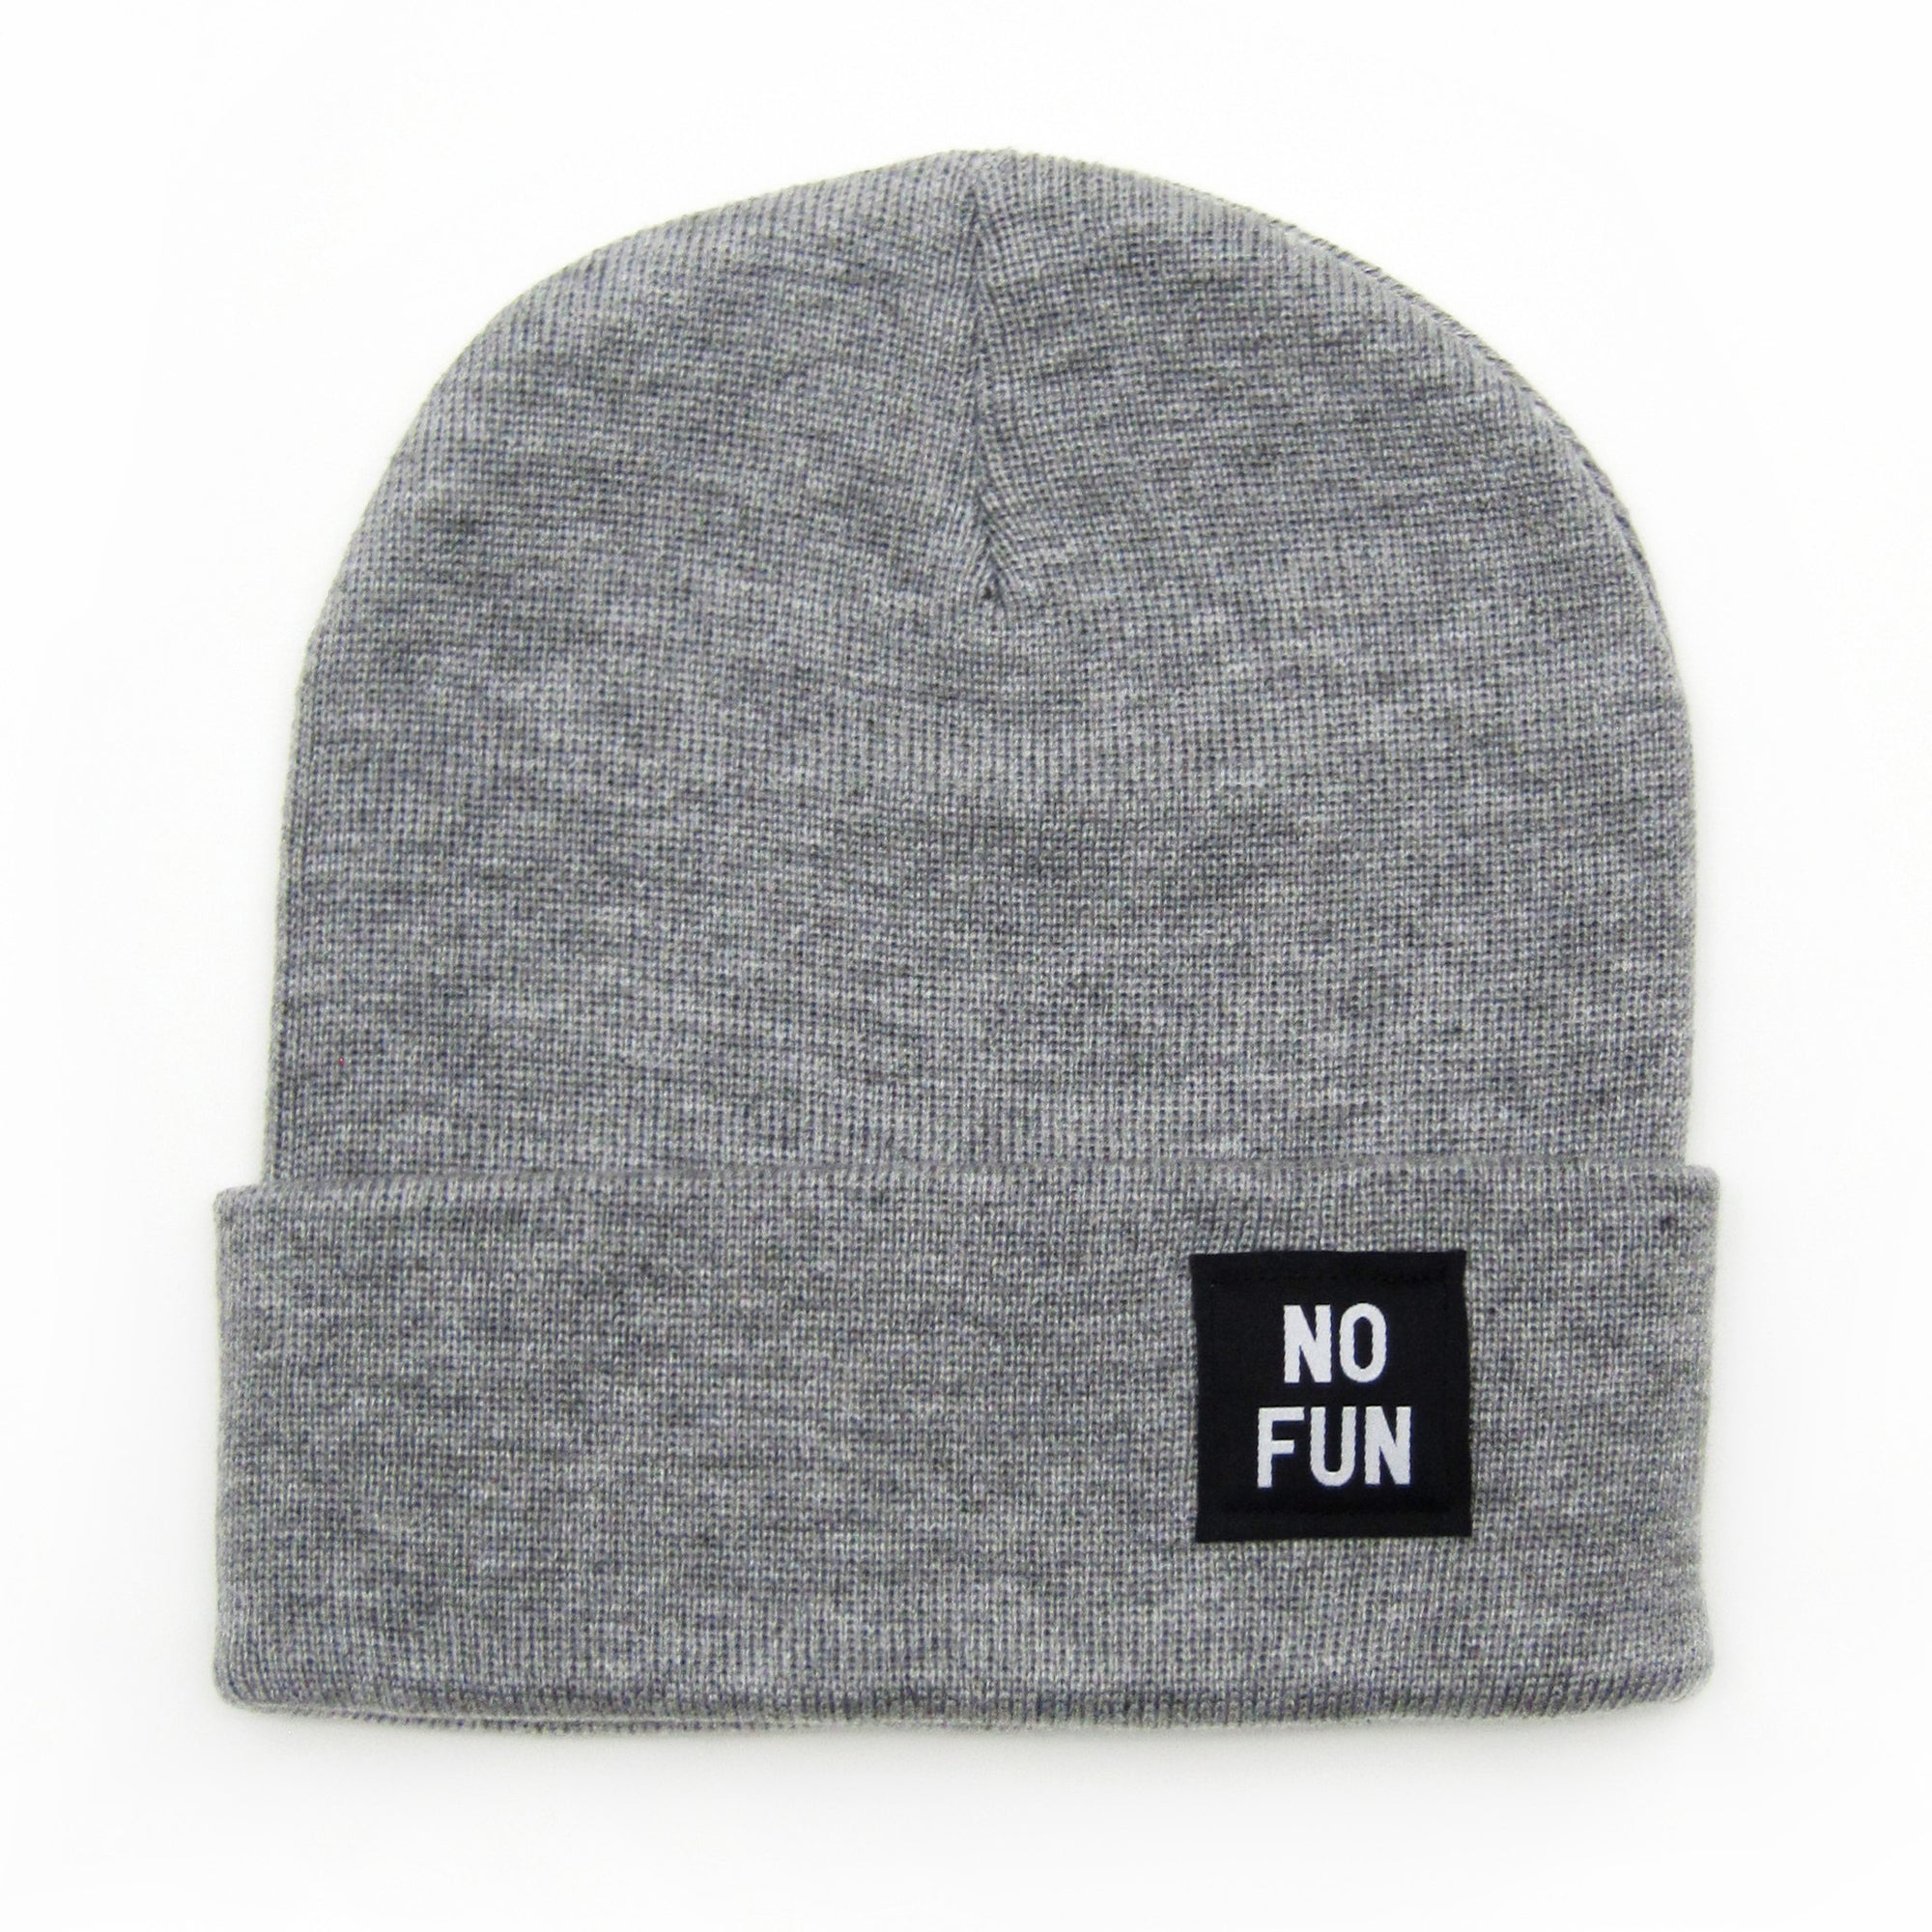 The classic "No Fun" labelled beanie in Heather Grey. There is a small, black, woven label that reads "No Fun®" on the cuff.